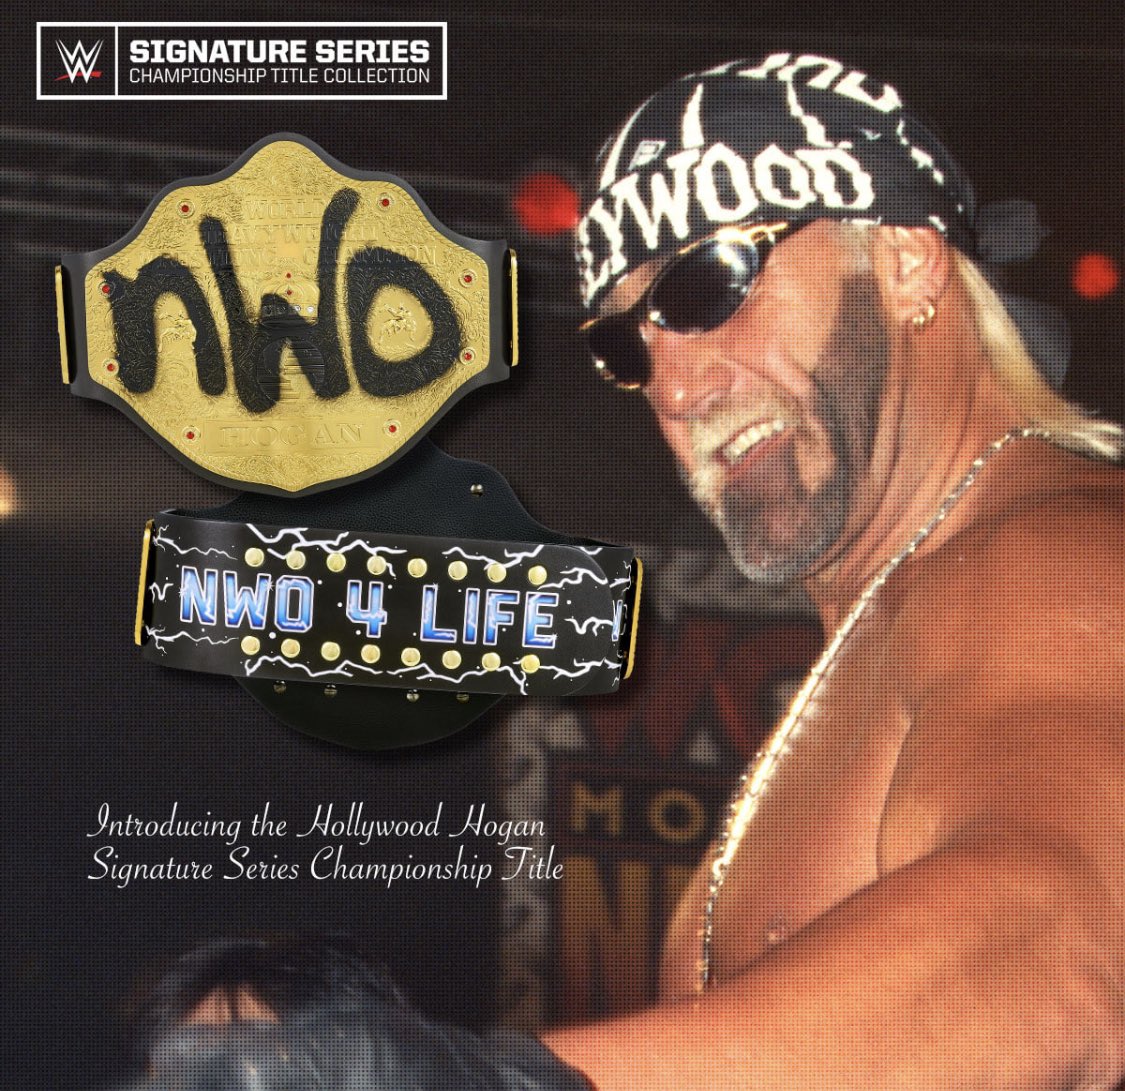 Hulk on Twitter: "In 1996 I celebrated victory over The Giant by spray N-W-O across WCW Available only @WWEShop, this brand-new Signature Series title captures my Hollywood attitude